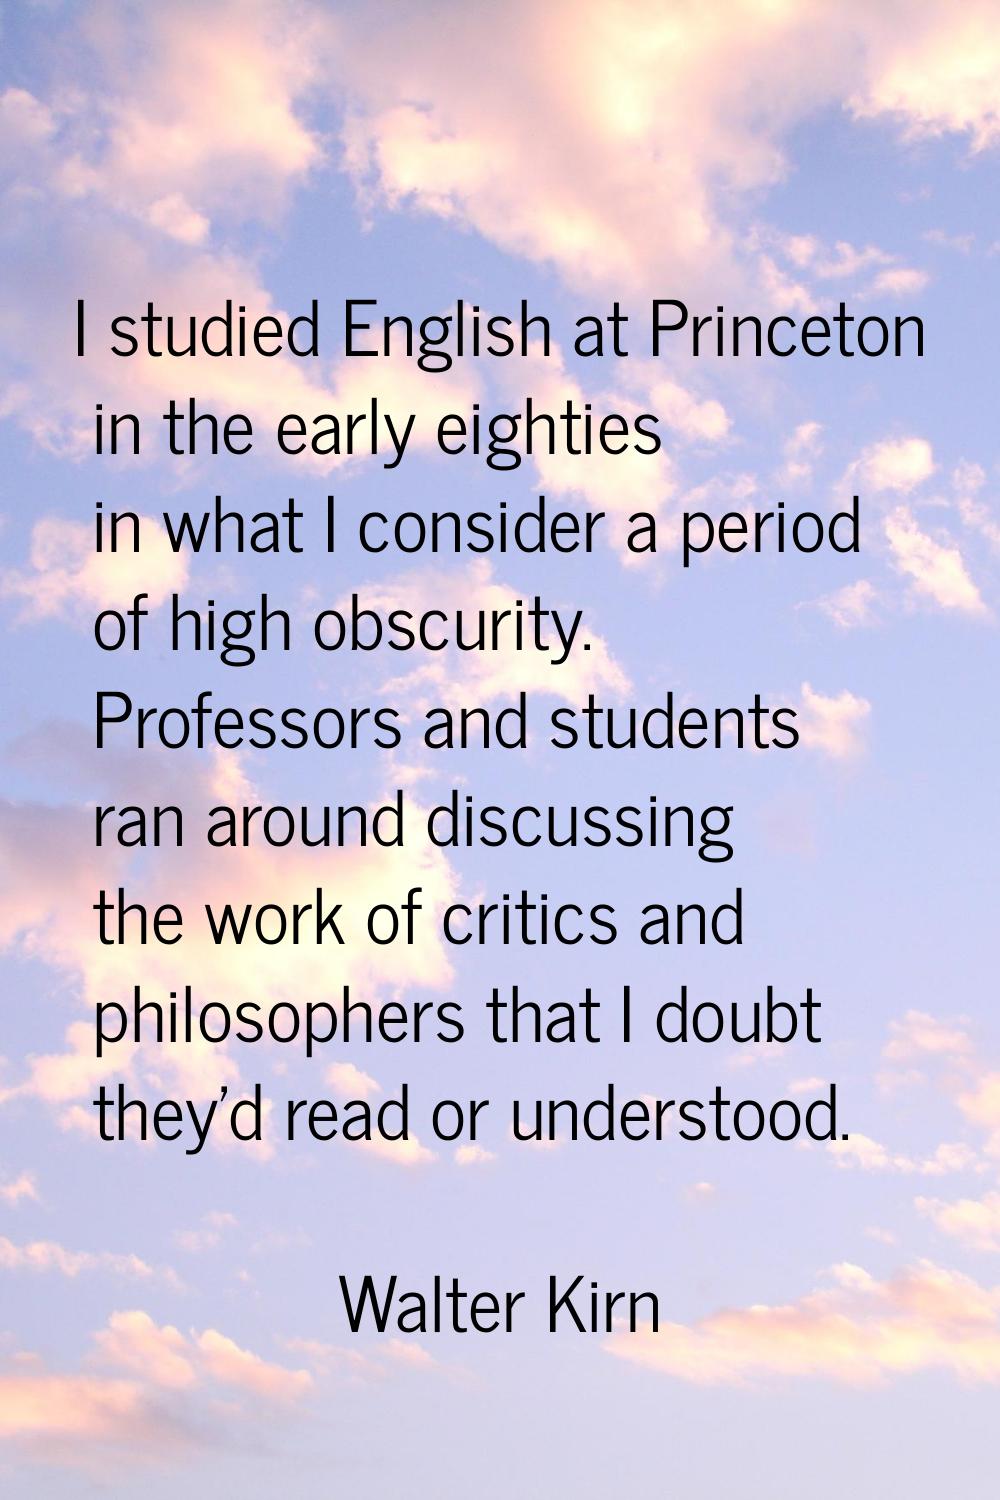 I studied English at Princeton in the early eighties in what I consider a period of high obscurity.